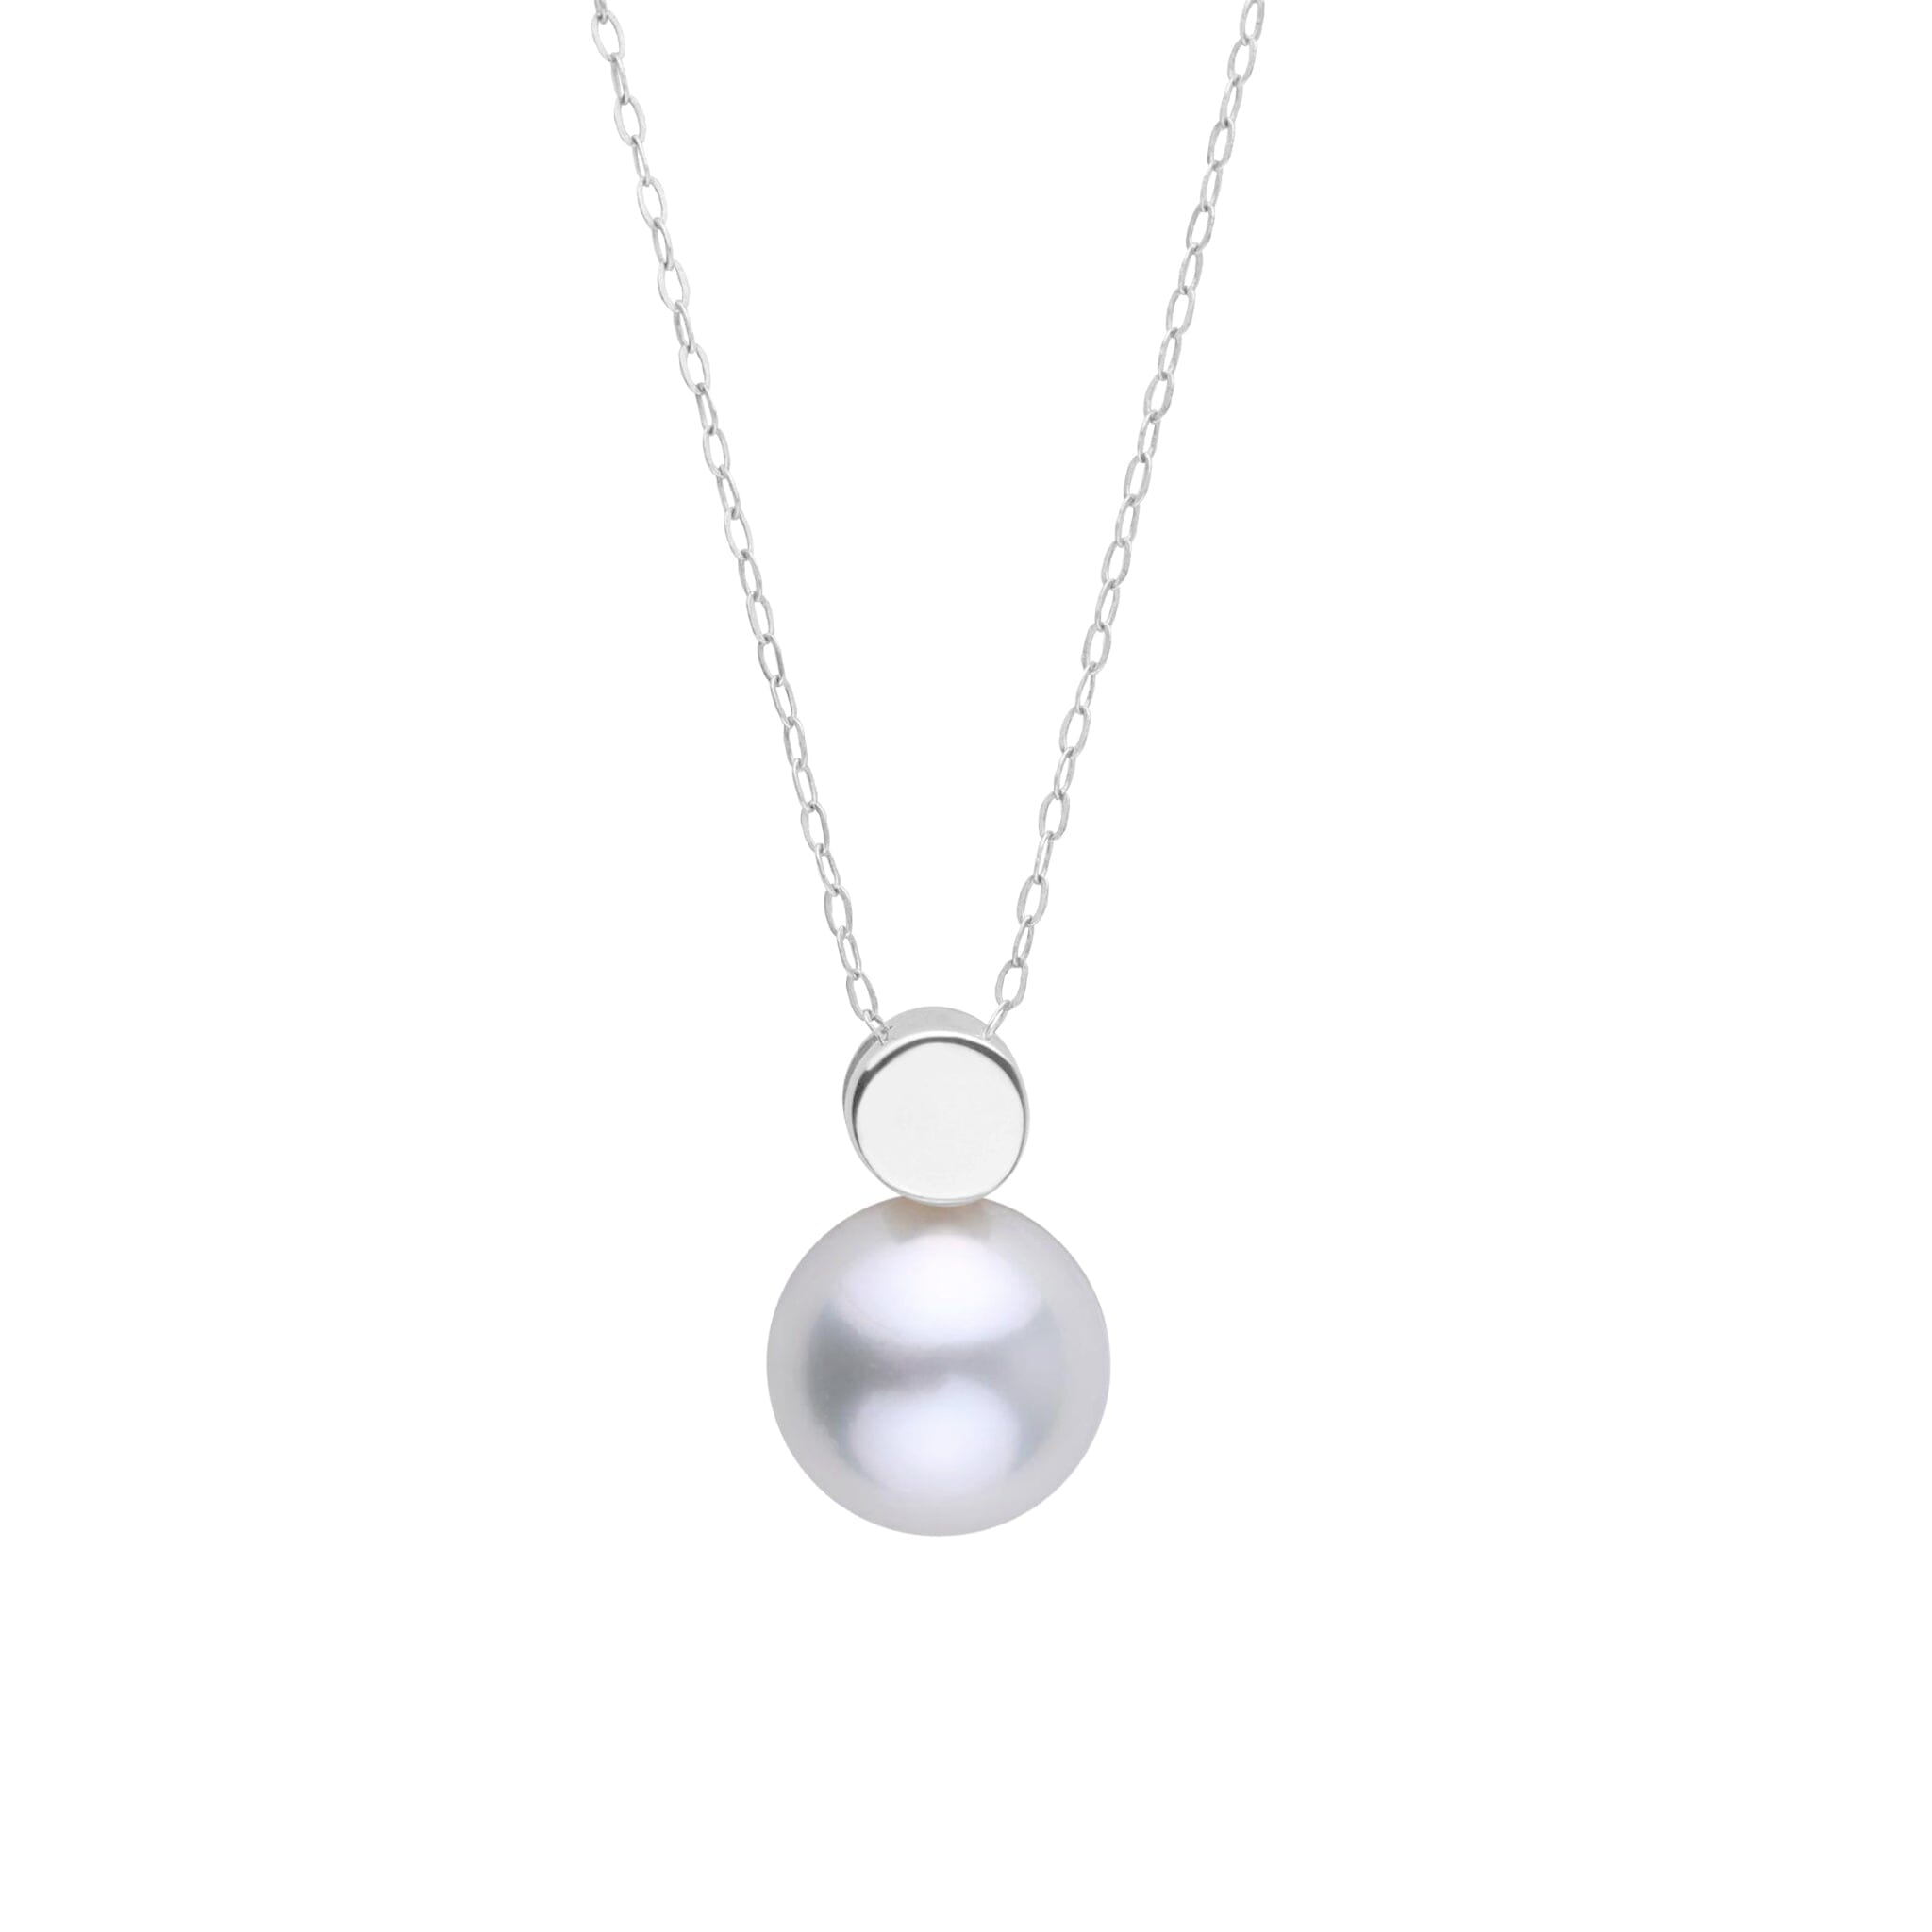 Dot Collection 10.0-11.0 mm White South Sea Pearl Pendant White Gold